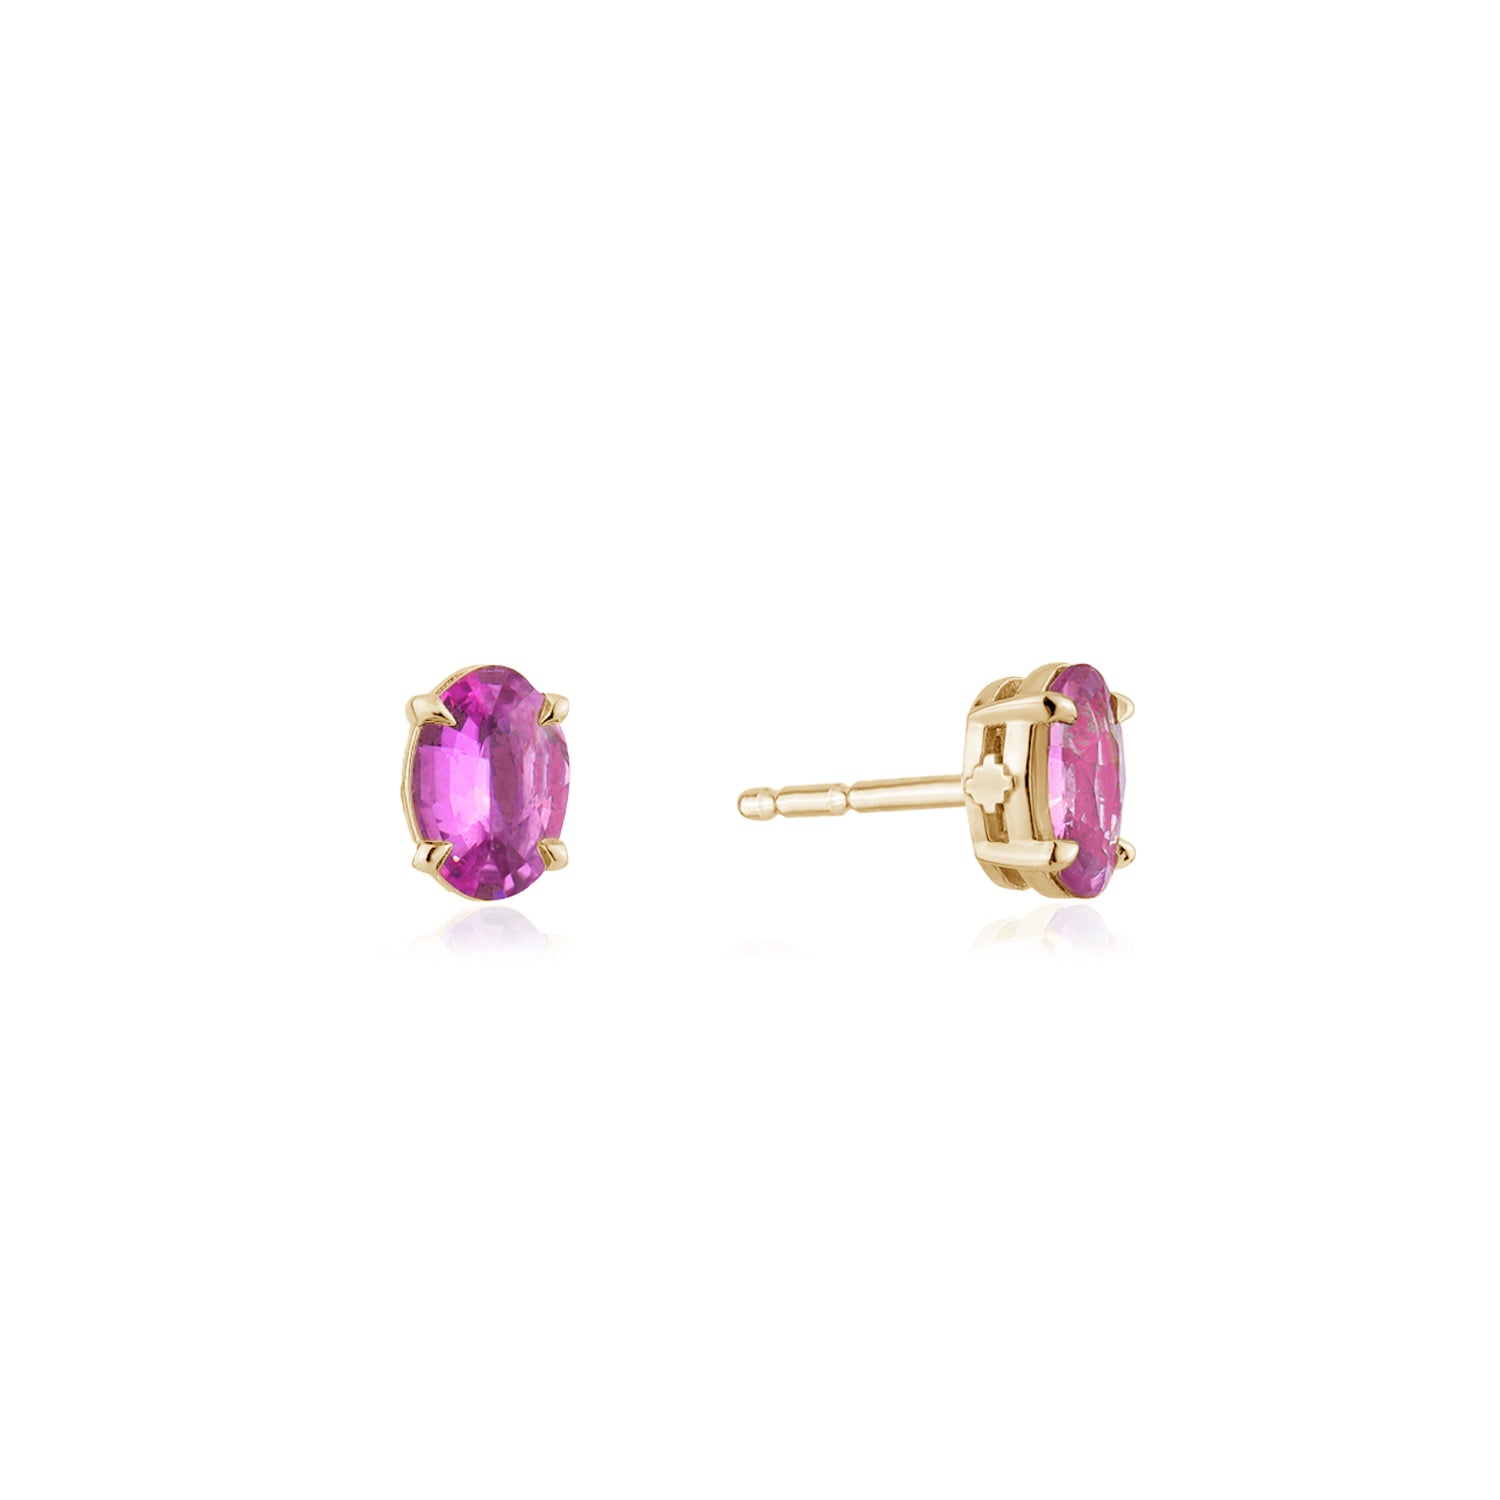 Oval-Shaped Pink Sapphire Stud Earrings in Yellow Gold